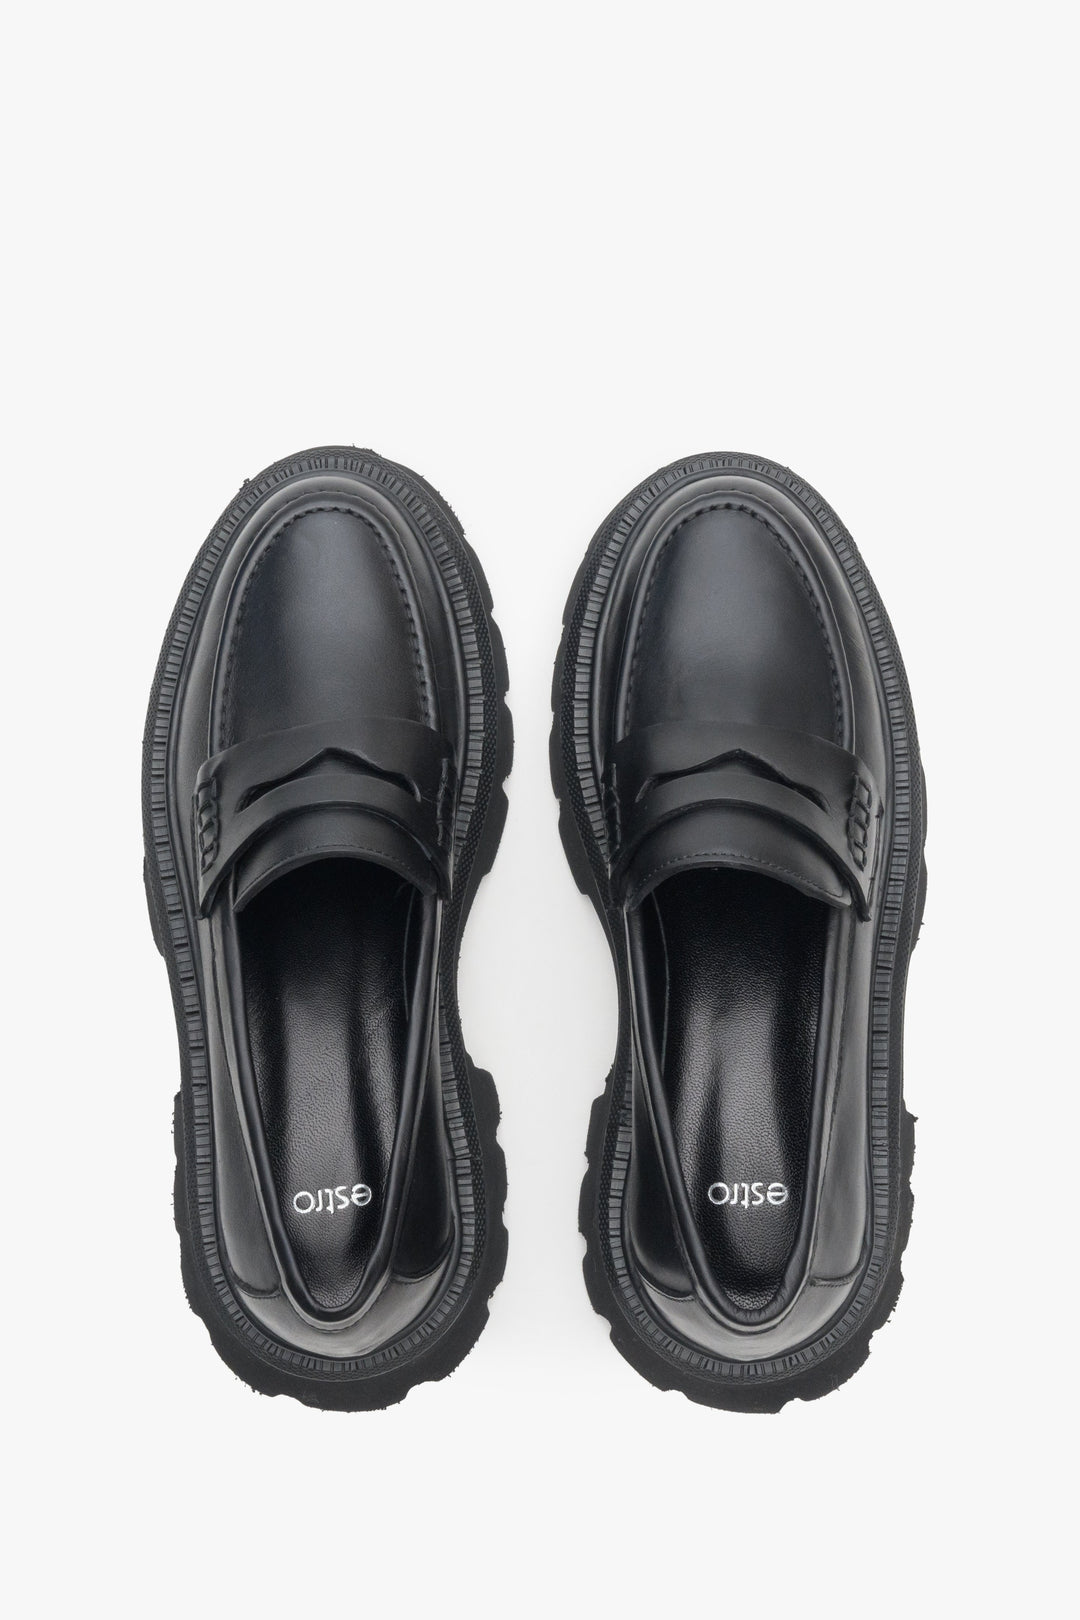 Women's leather black loafers by Estro - top view presentation of the model.